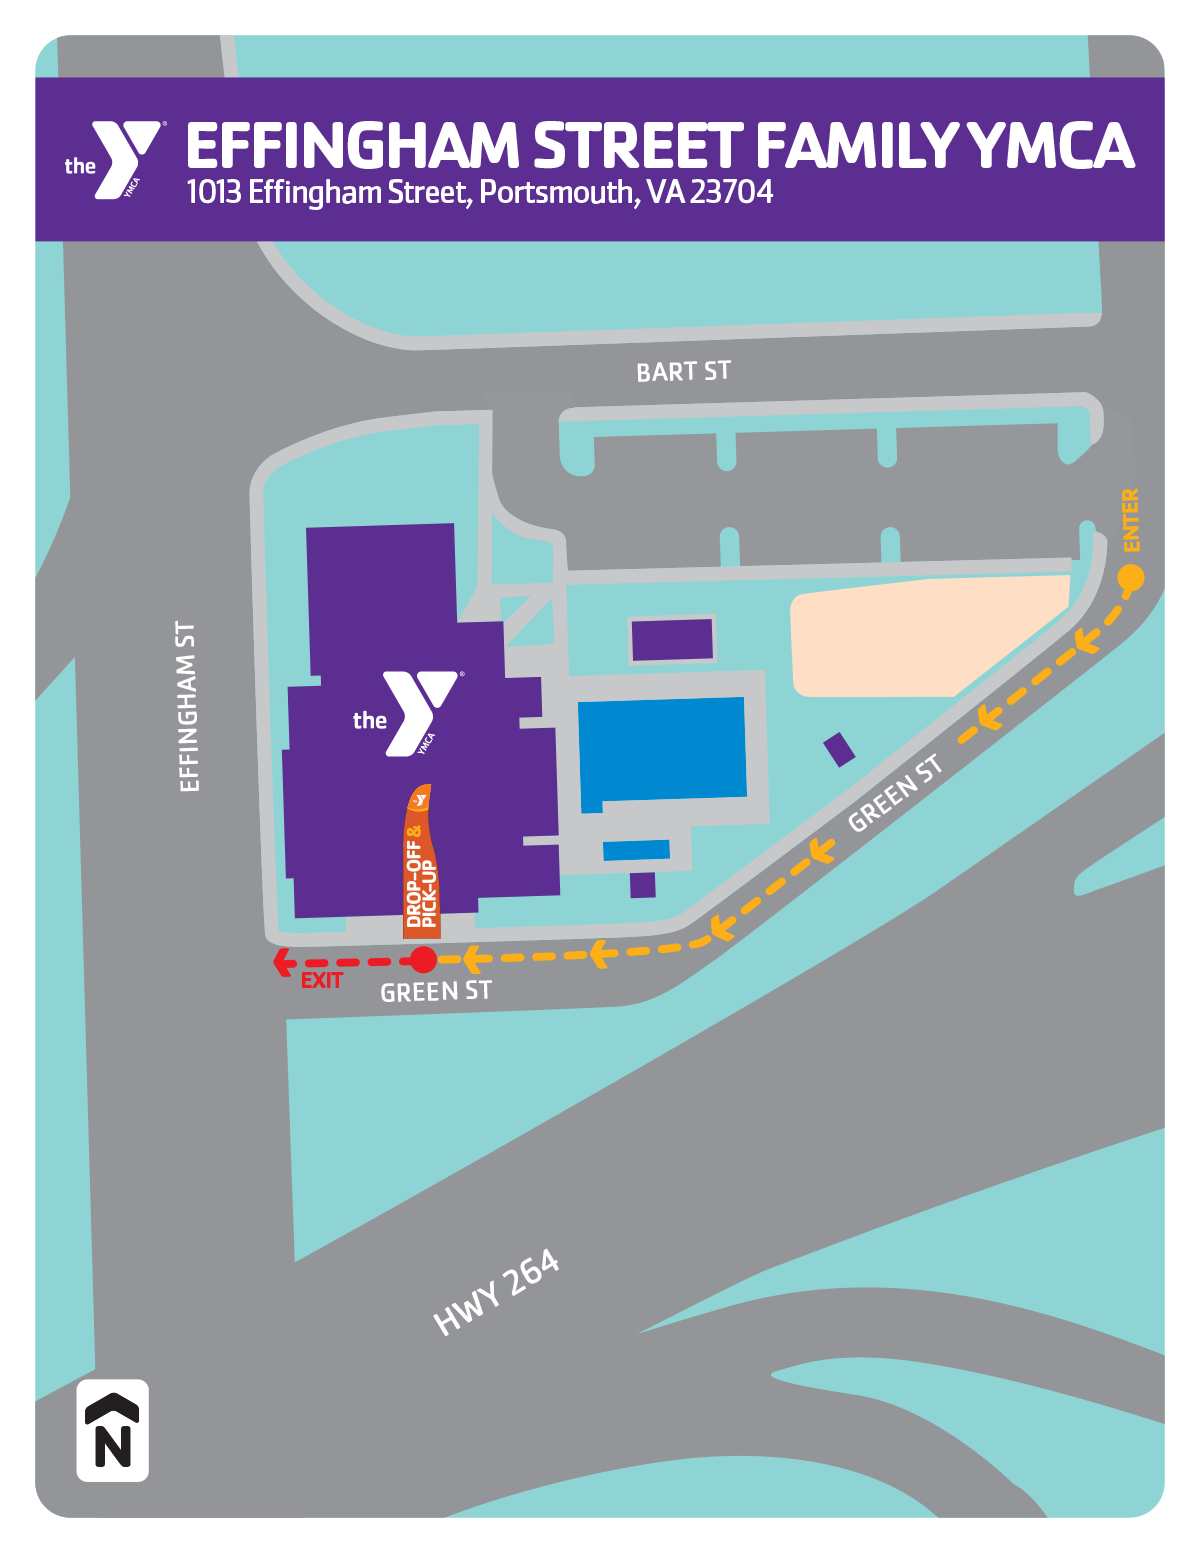 Summer camp drop-off & pick-up locations for the Effingham Street Family YMCA